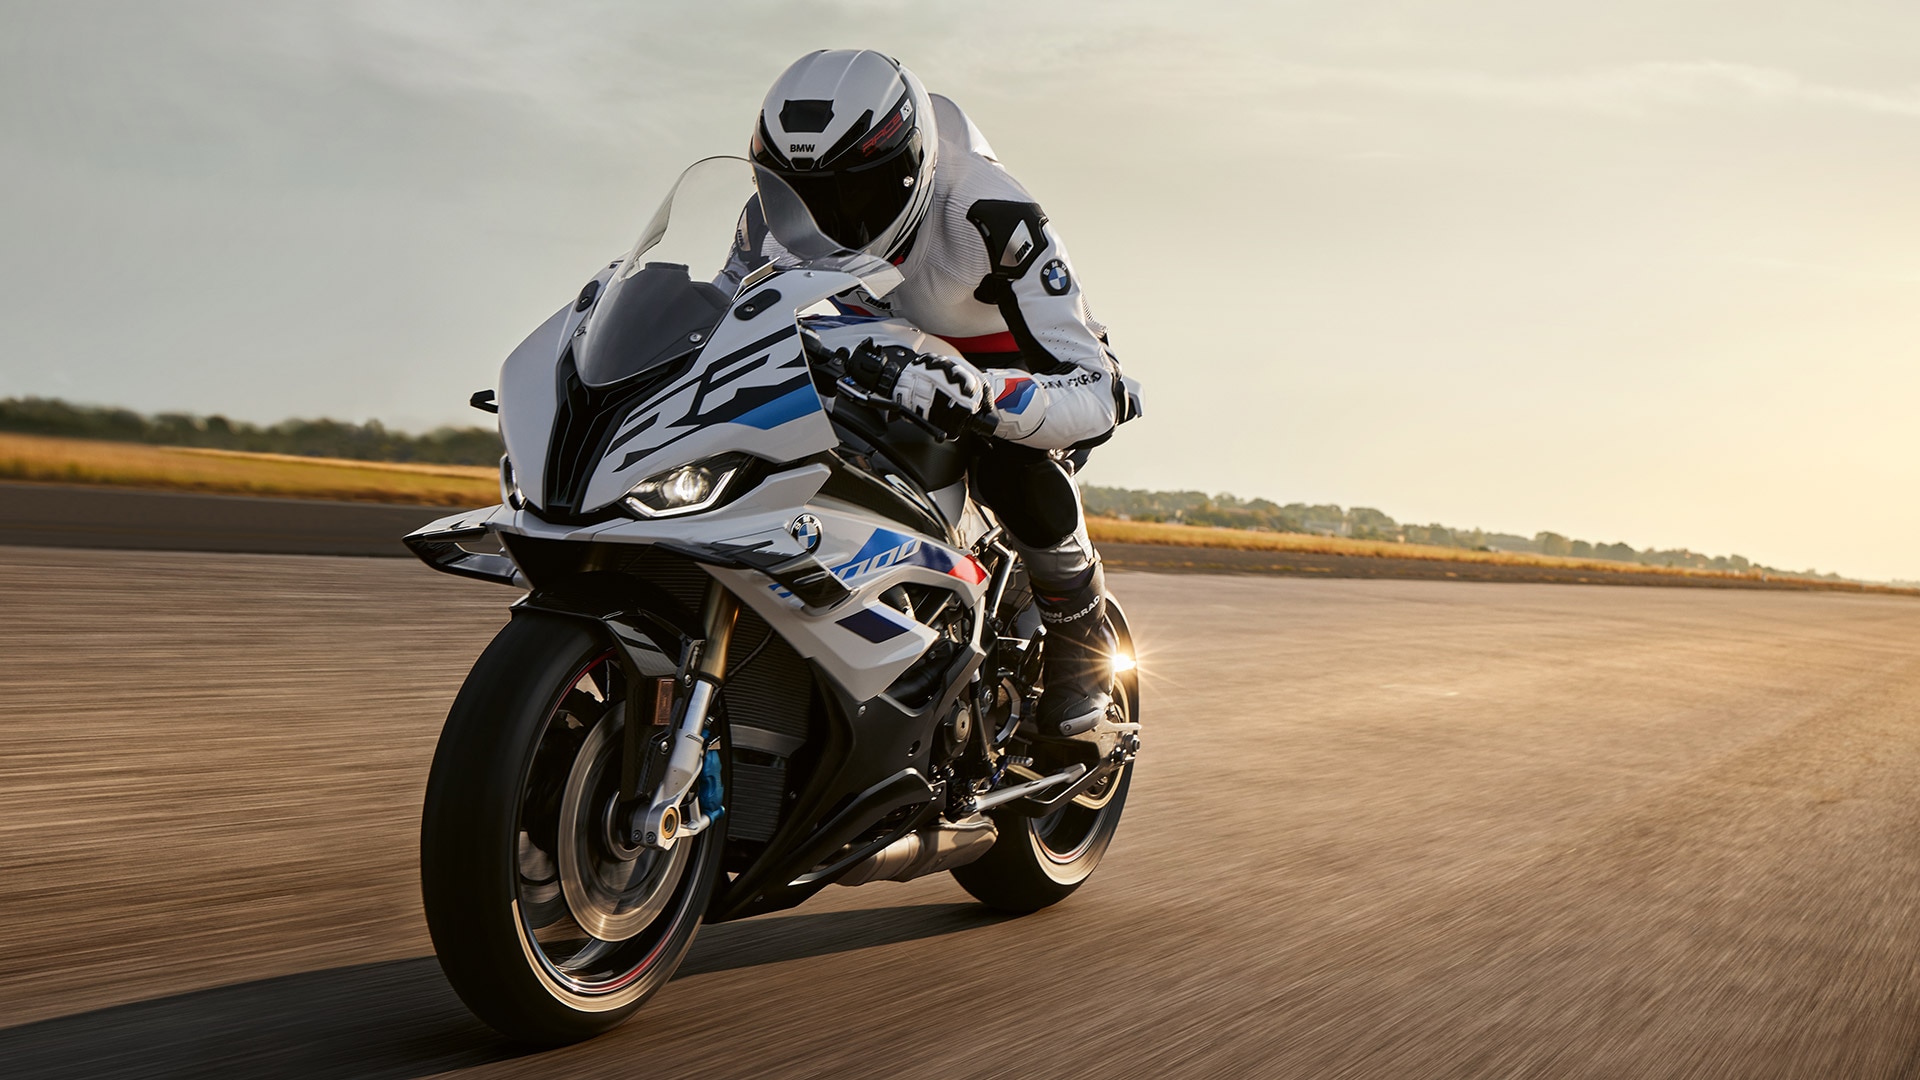 A BMW S 1000 RR being ridden on a road